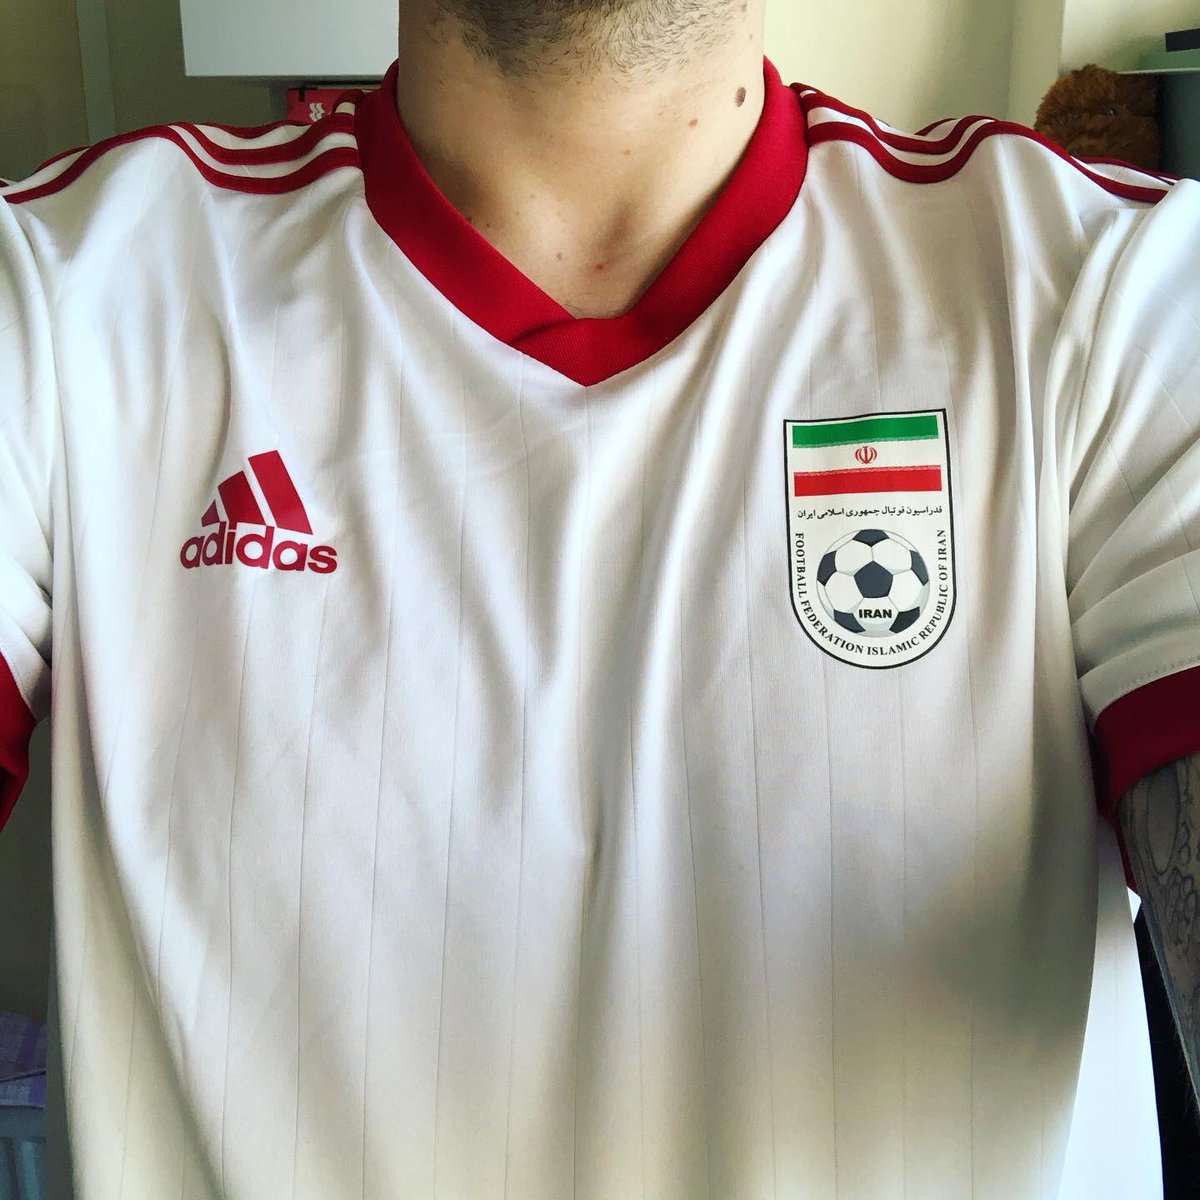 IranHome Kit, 2018Adidas, unofficial replicaI started seriously getting into football shirts by deciding I’d start collecting one from every country I’ve visited.Sadly, I didn’t buy one in Iran when I went there in 2015, so I got this from ebay, a decent enough replica